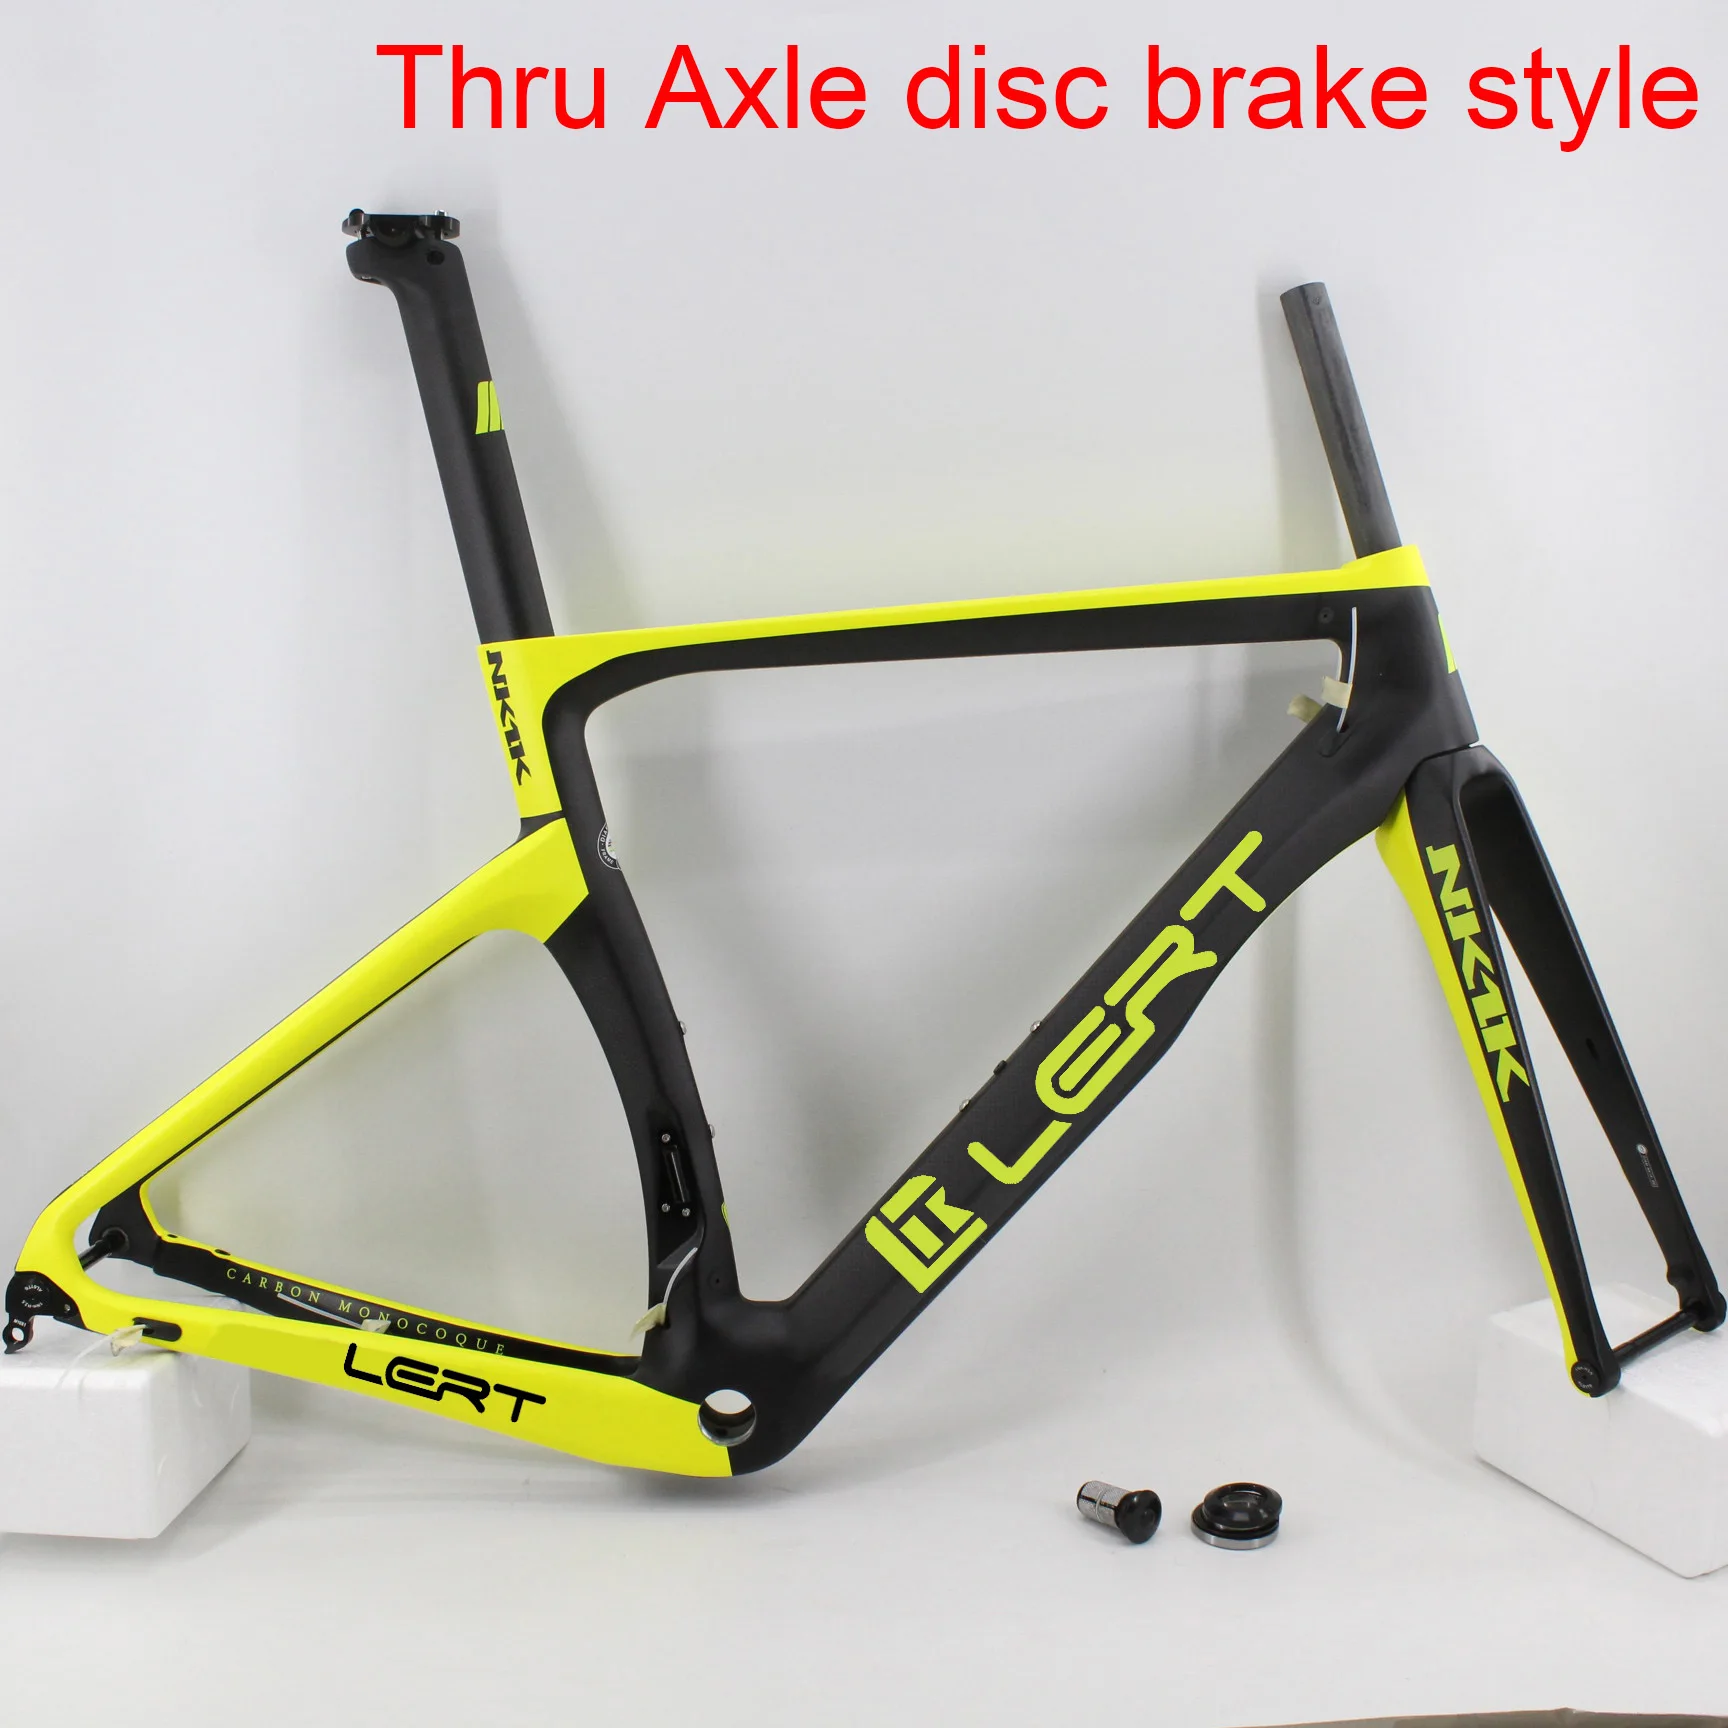 

Newest Fluo Green 700C Racing Road Bike 3K Full Carbon Fibre Bicycle Thru Axle Disc Brake Frame Fork+Seatpost+Headsets Free Ship